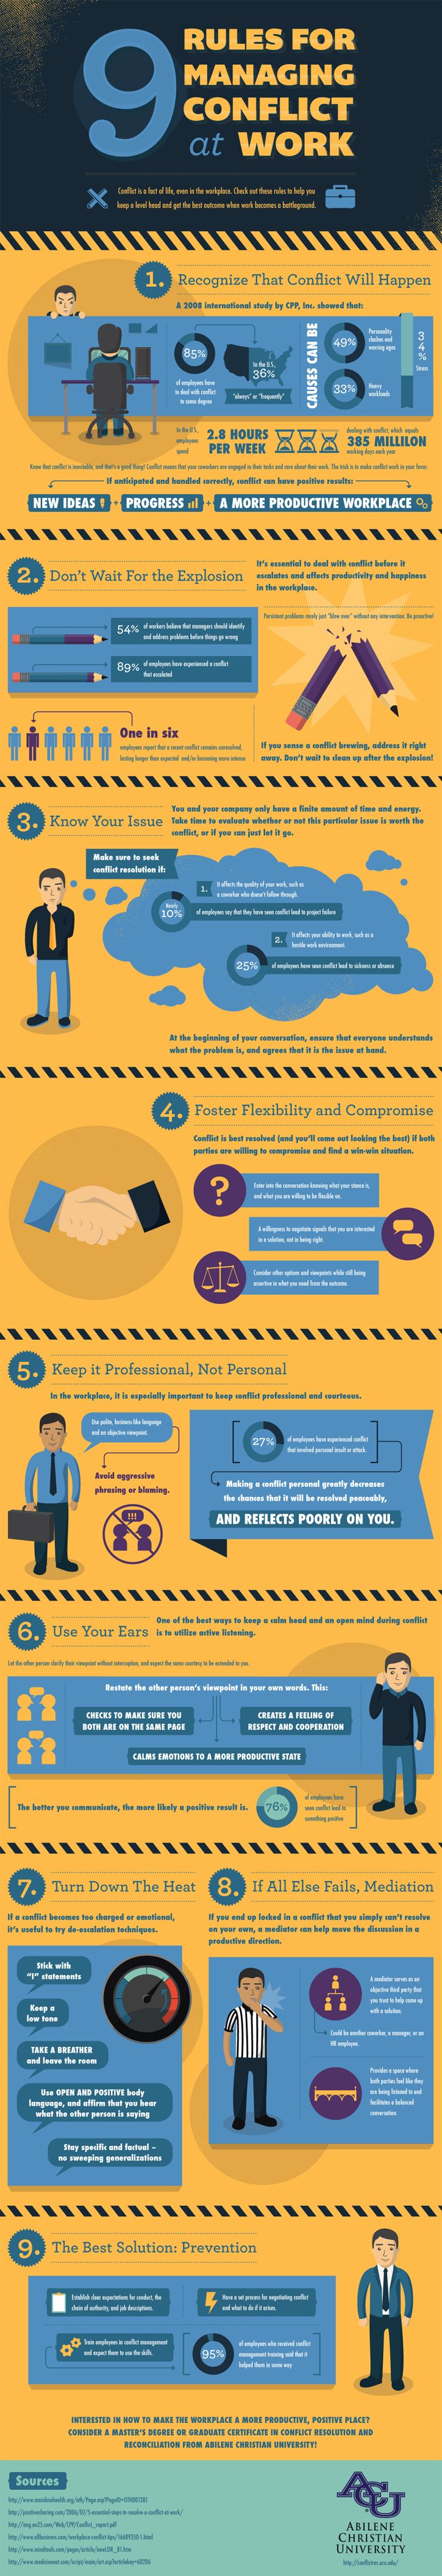 avoiding conflict in the workplace infographic